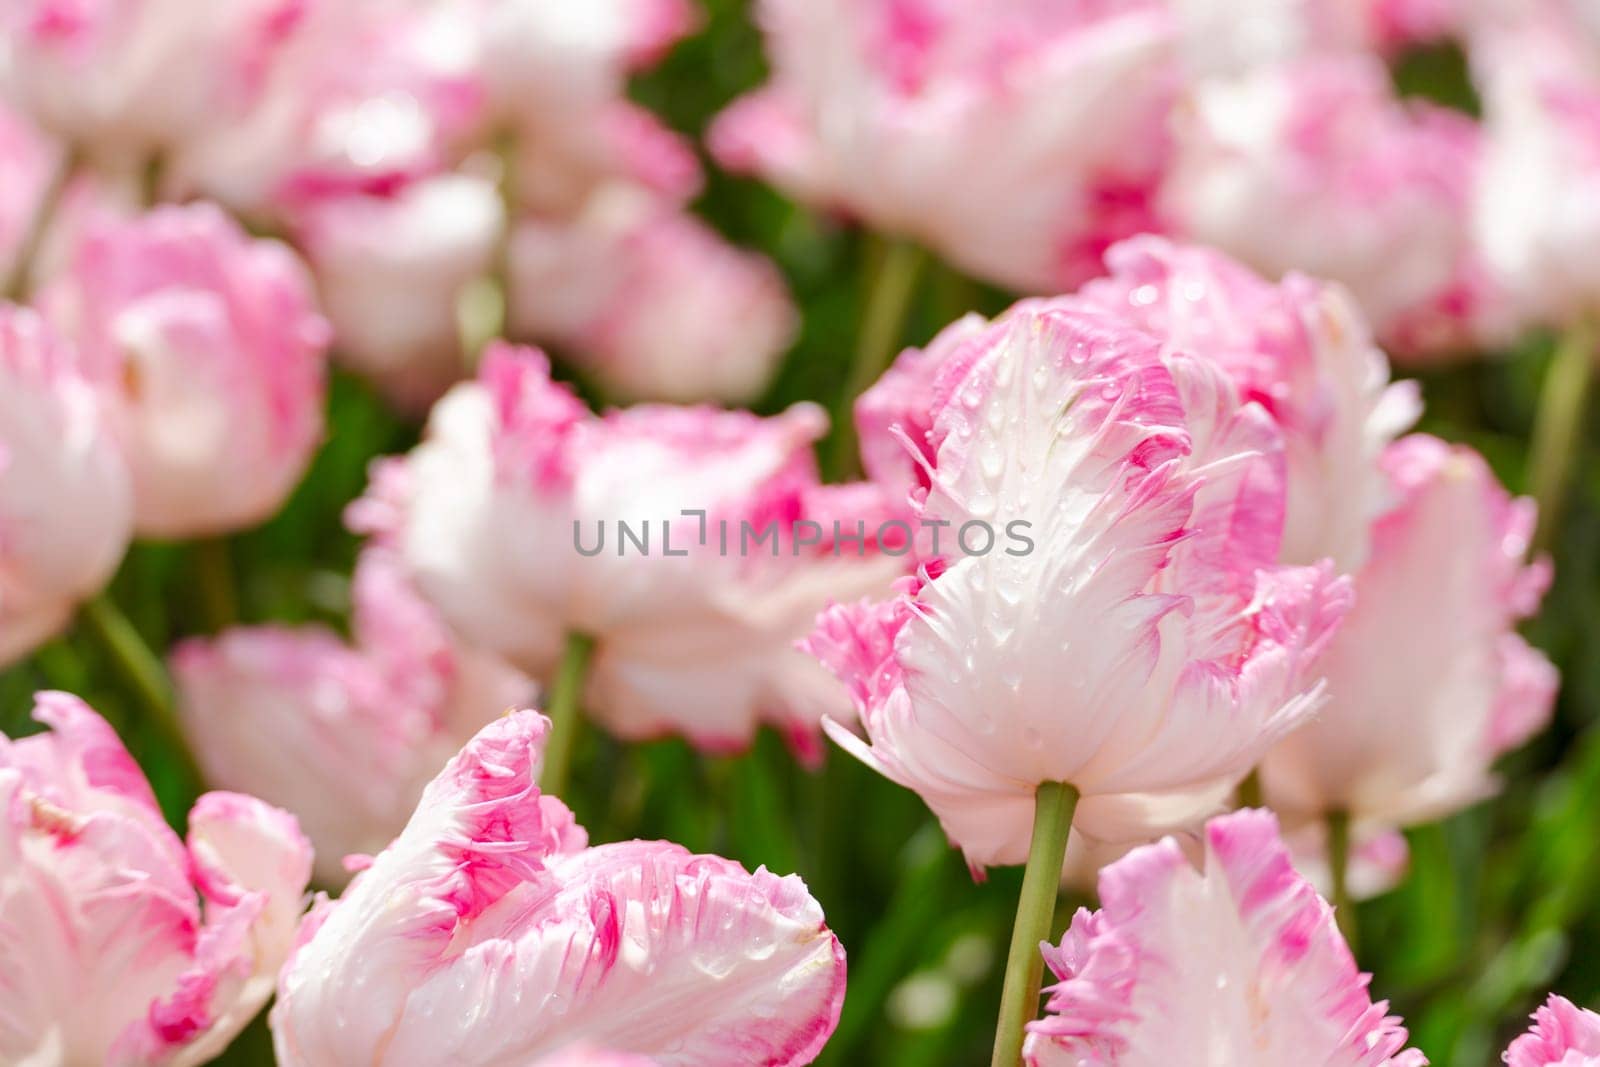 Tulip field. Pink tulips with white stripe close-up. Growing flowers in spring